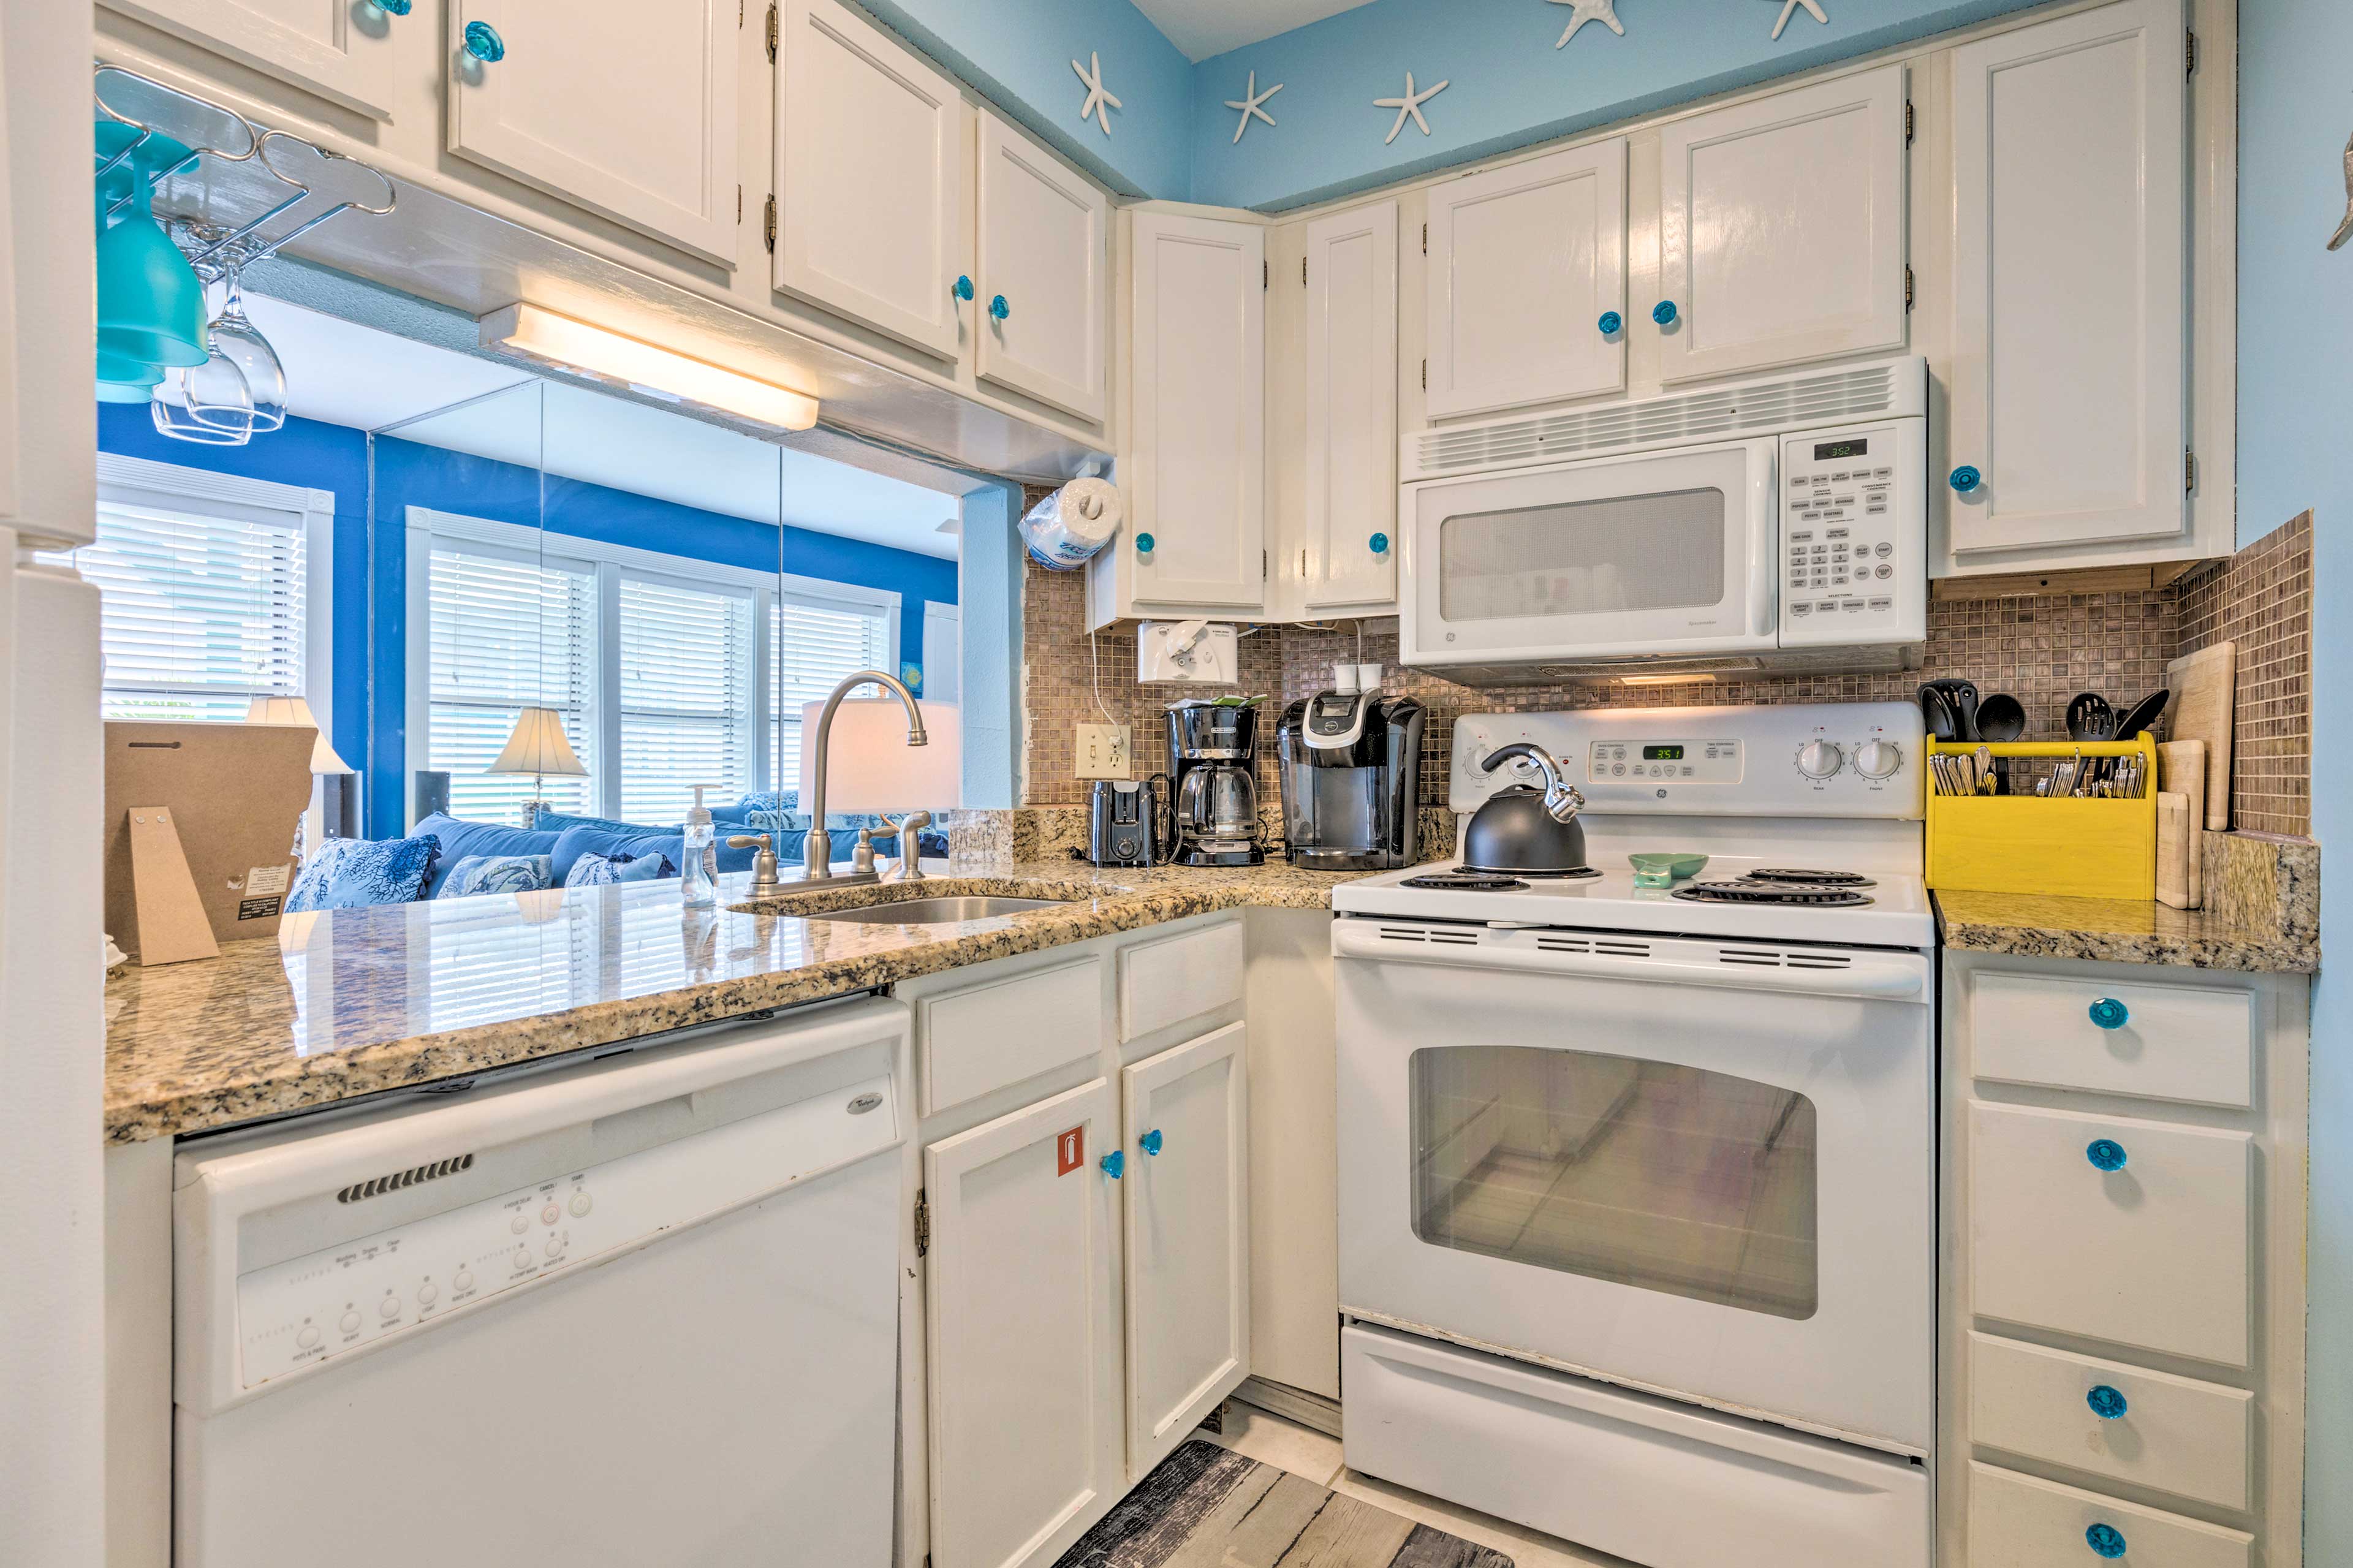 Condo Interior | Fully Equipped Kitchen